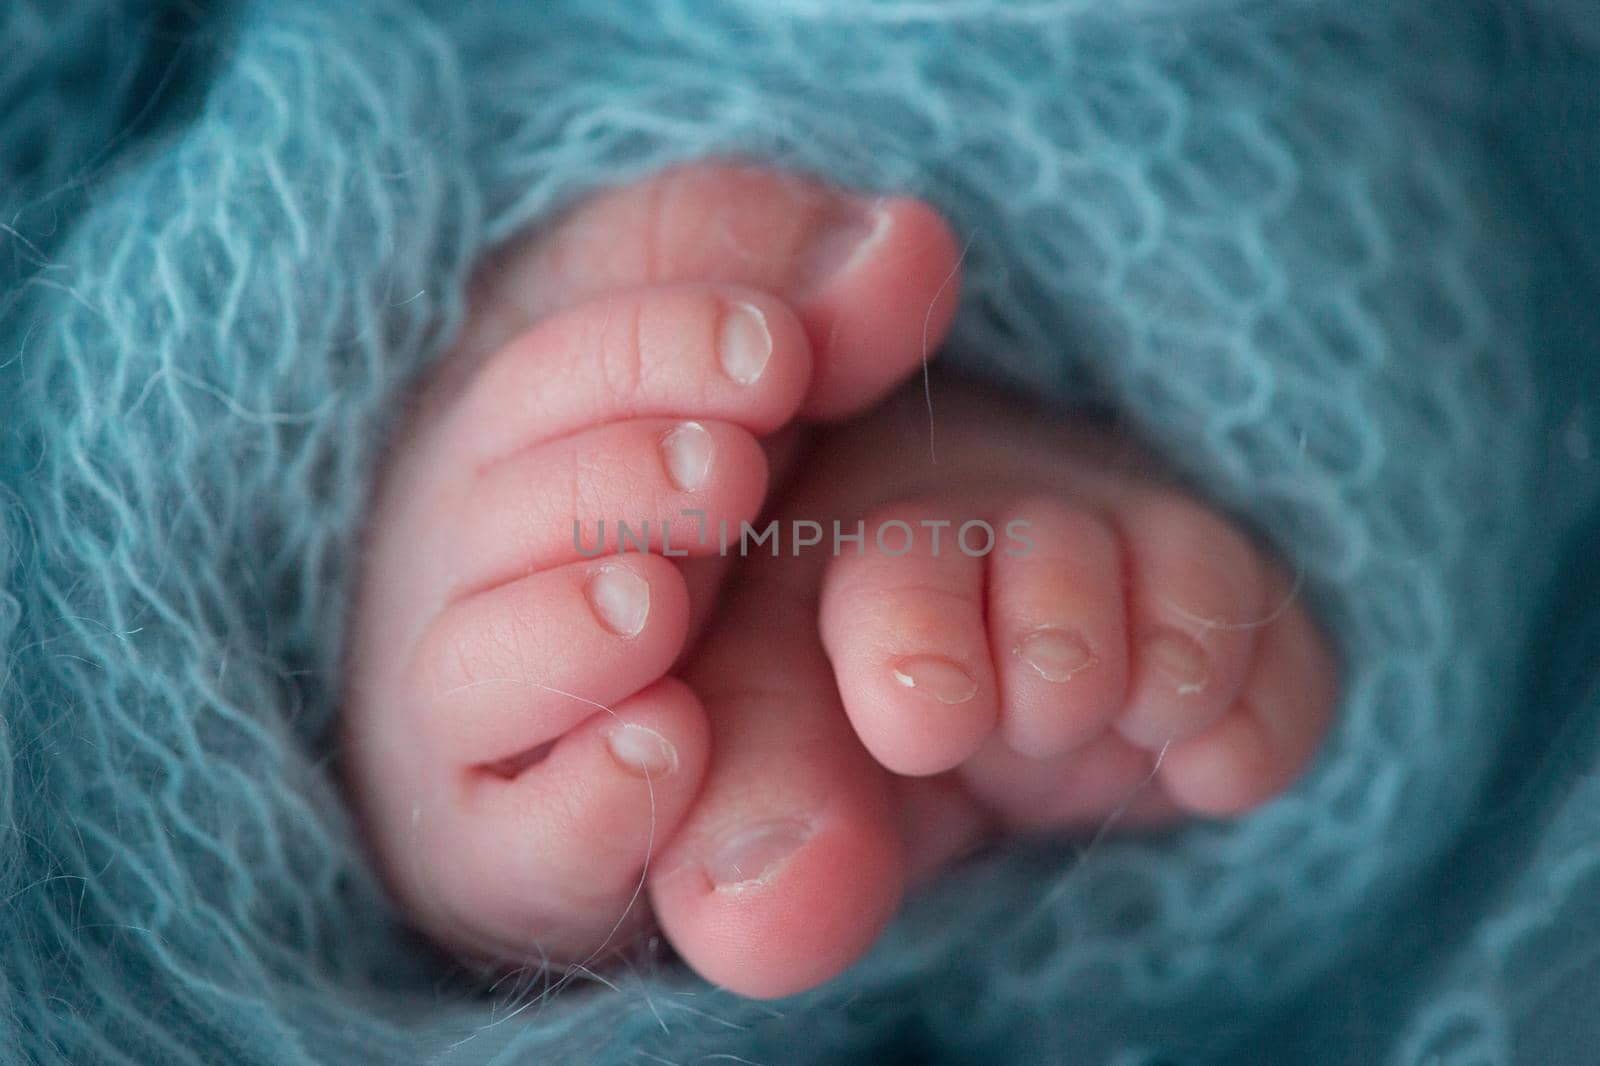 Two cute tiny baby feet wrapped in a blue-green aqua knitted blanket by Vad-Len